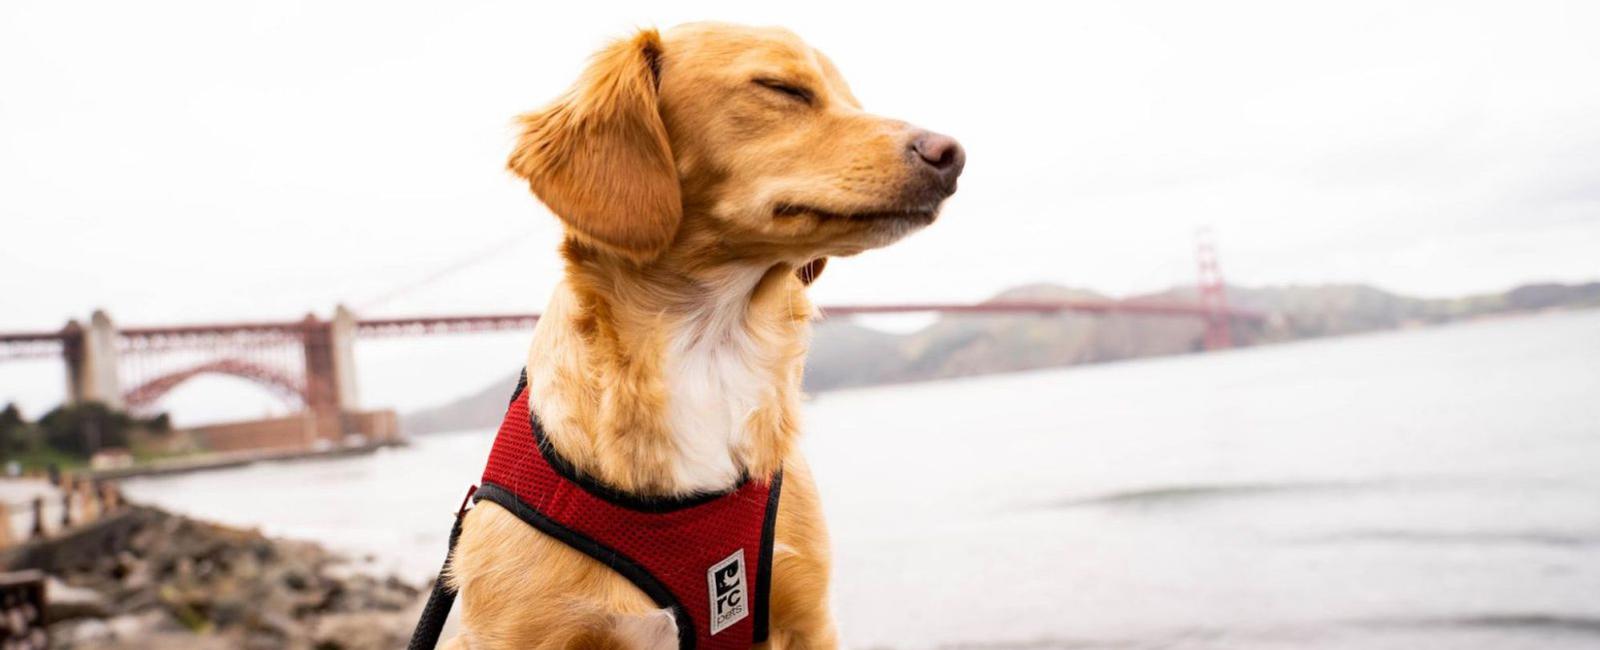 Leaving a Harness on Your Dog All Day: Is It a Good Idea?